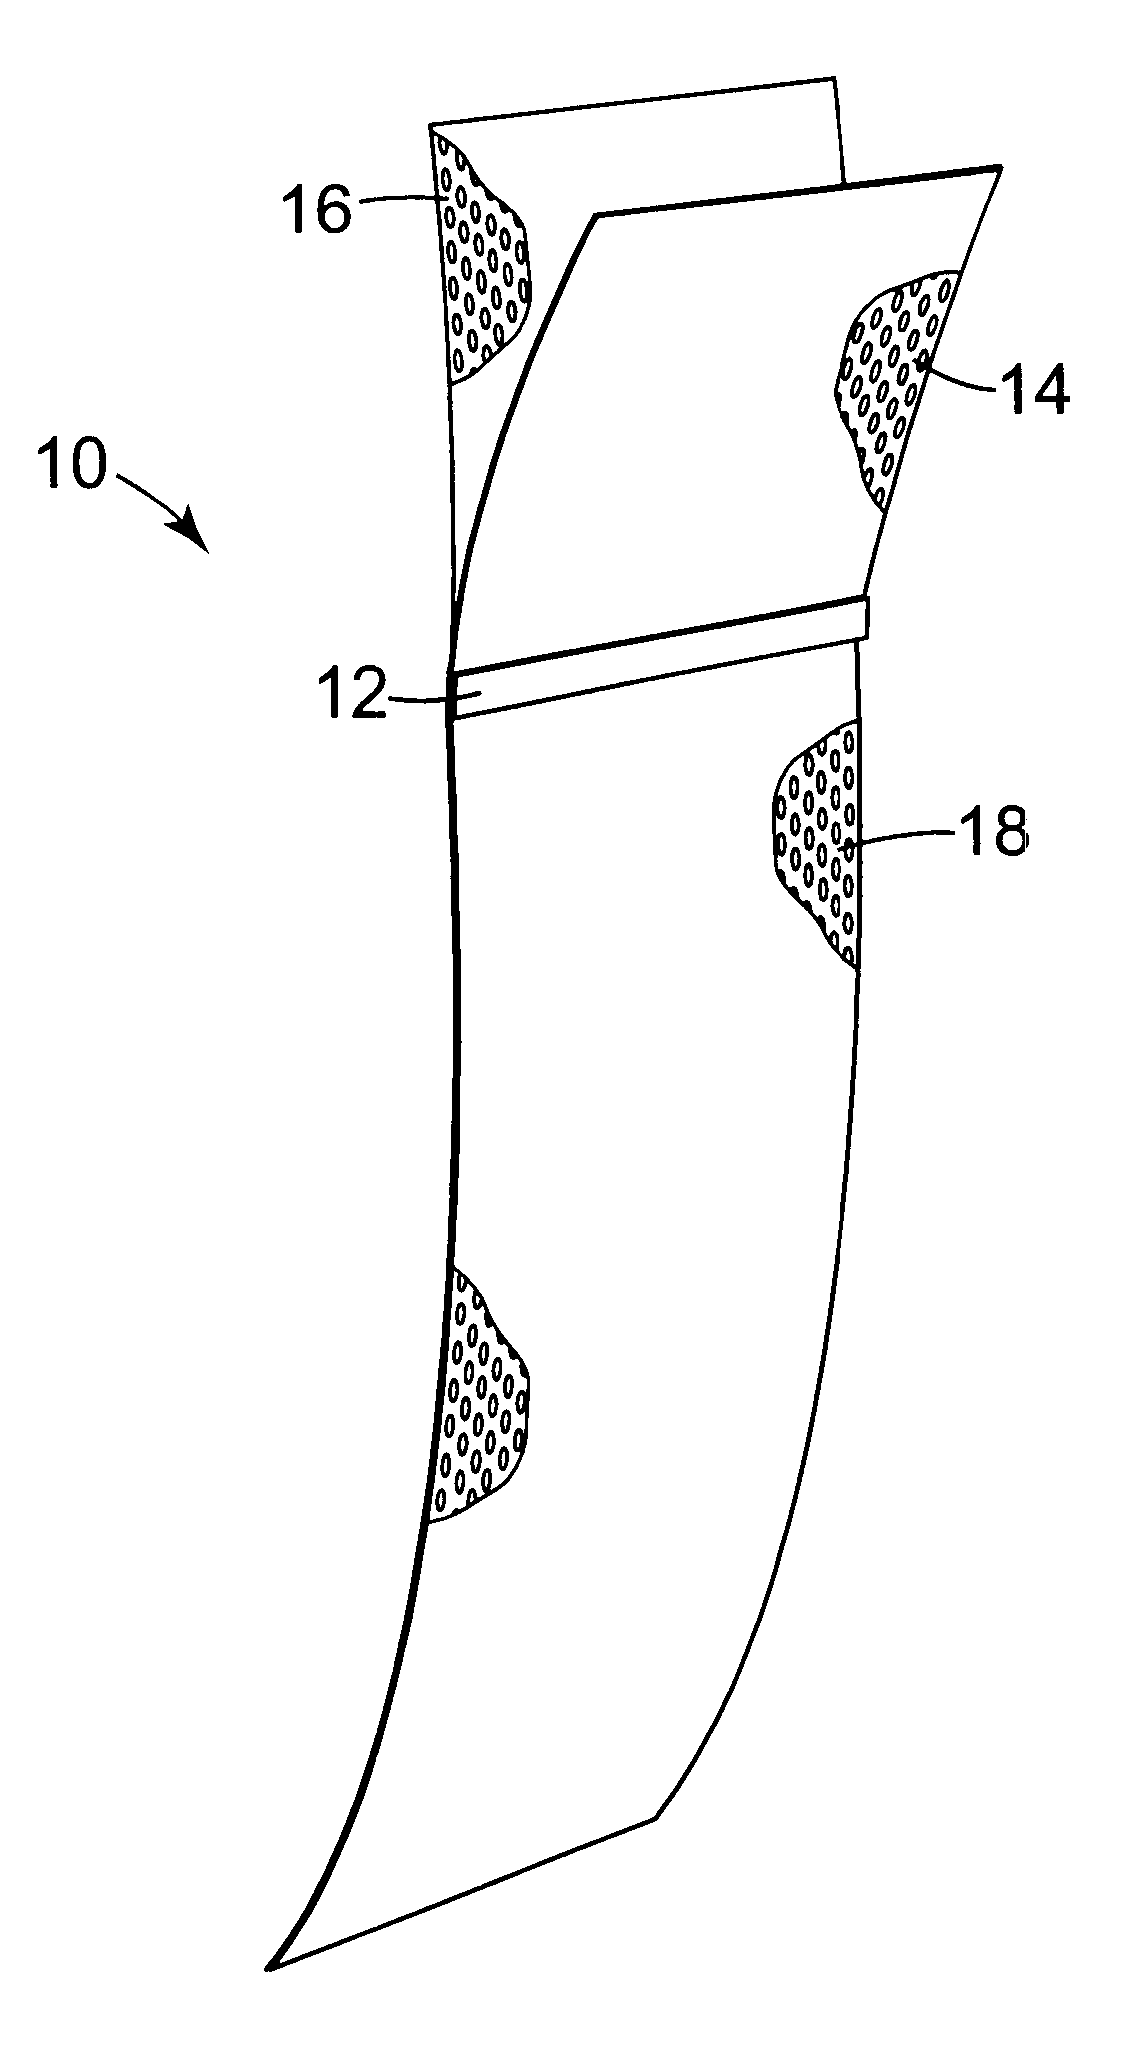 Implantable article and method